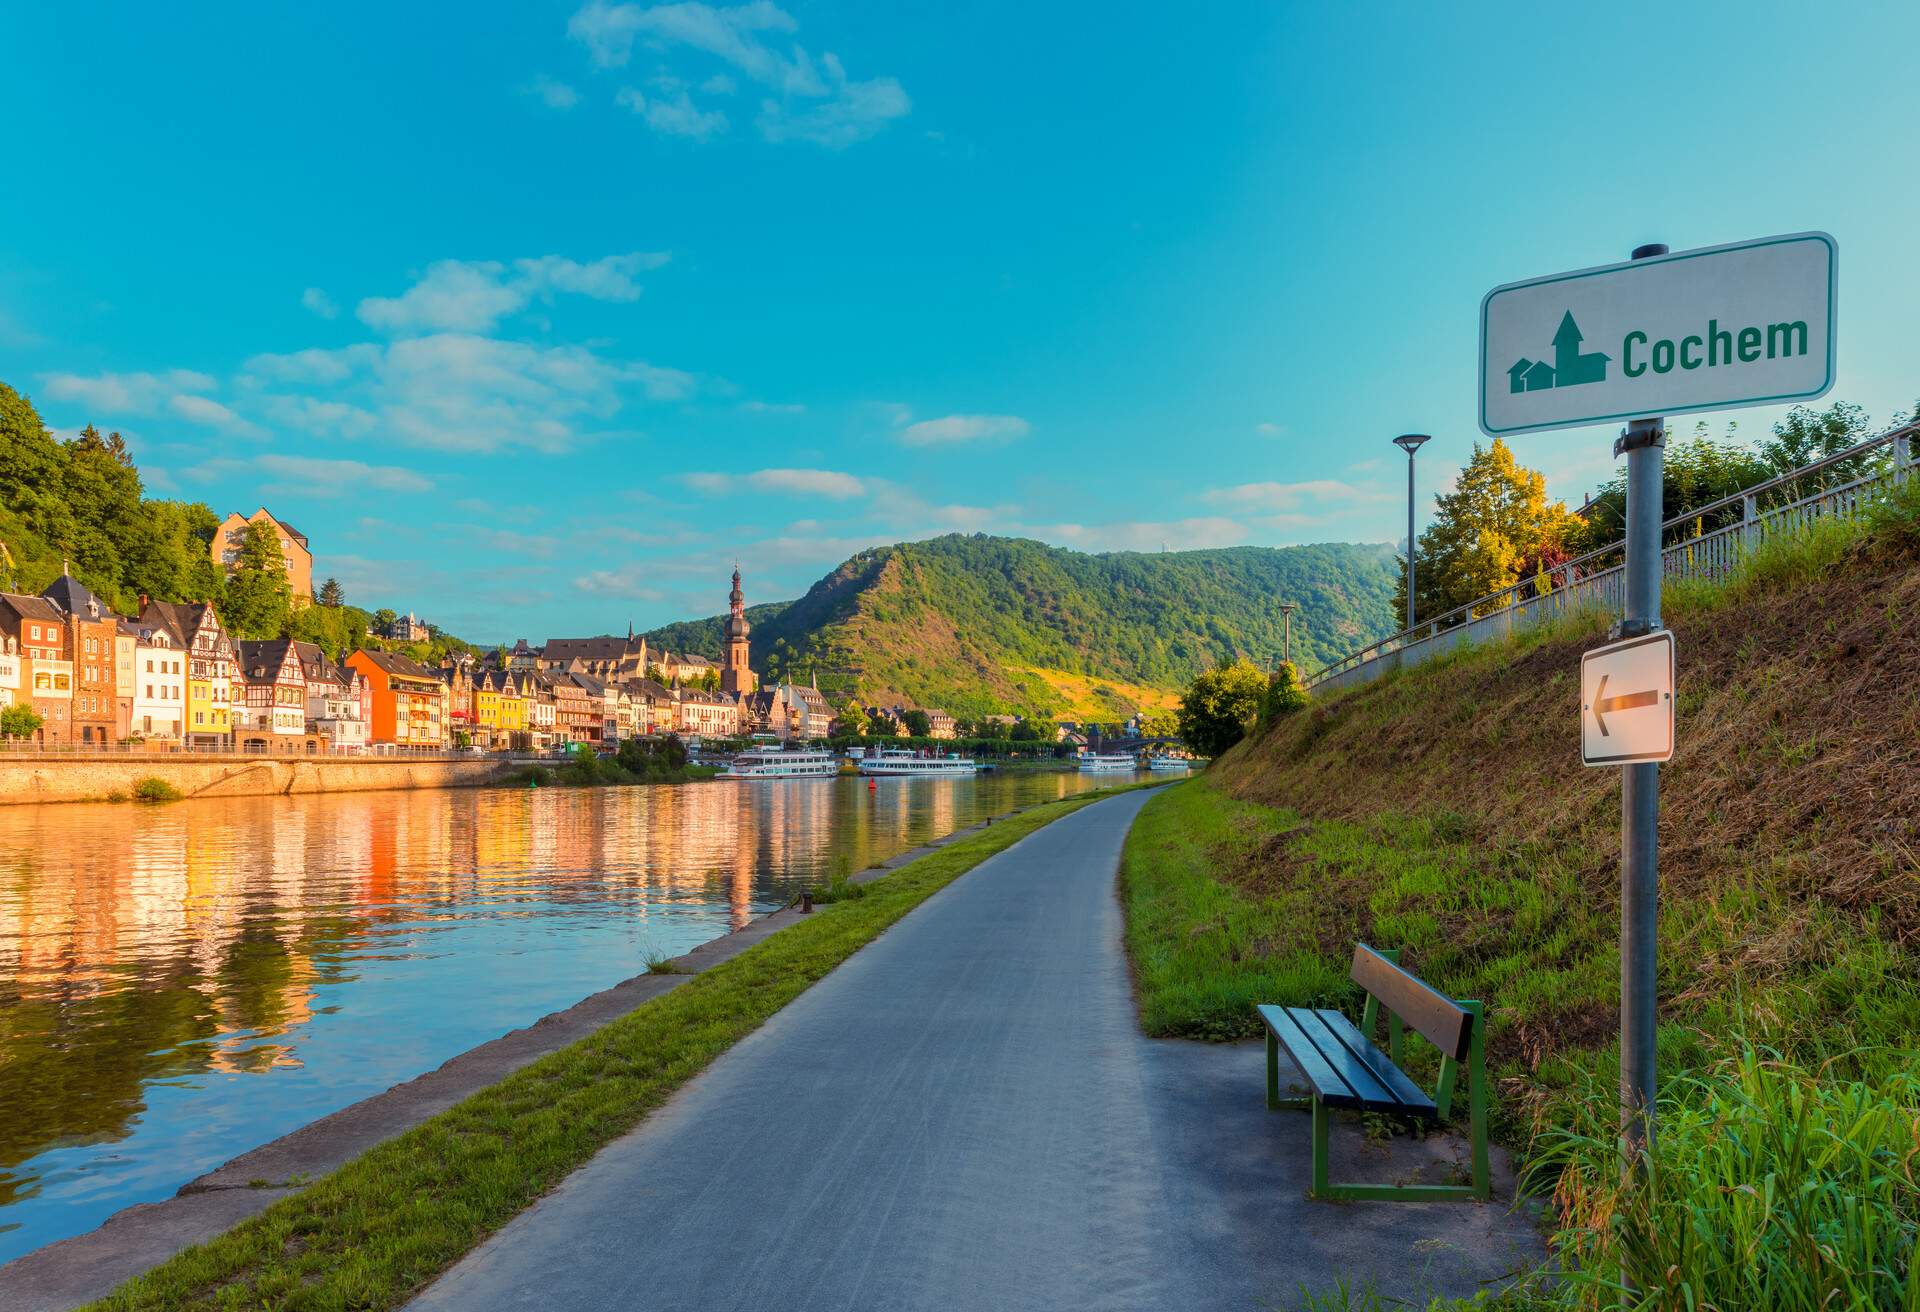 Footpath along Mosel River in Cochem Germany around Sunrise